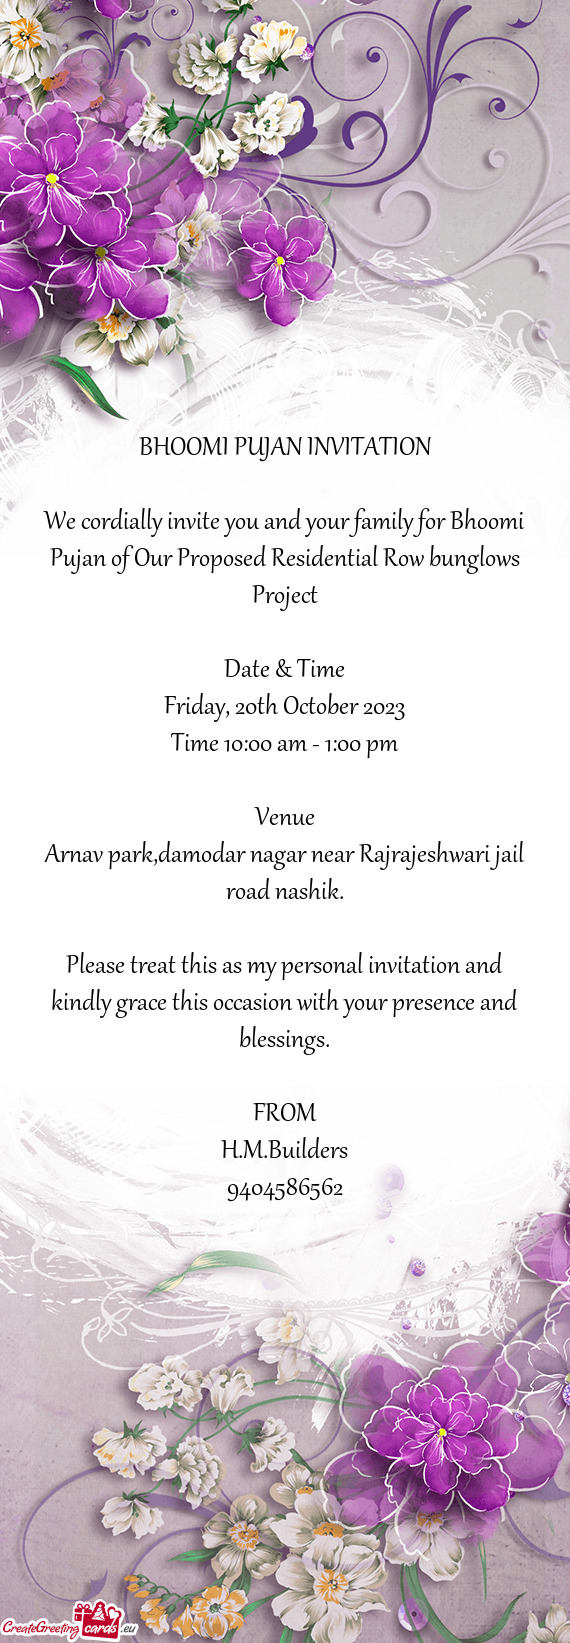 We cordially invite you and your family for Bhoomi Pujan of Our Proposed Residential Row bunglows Pr